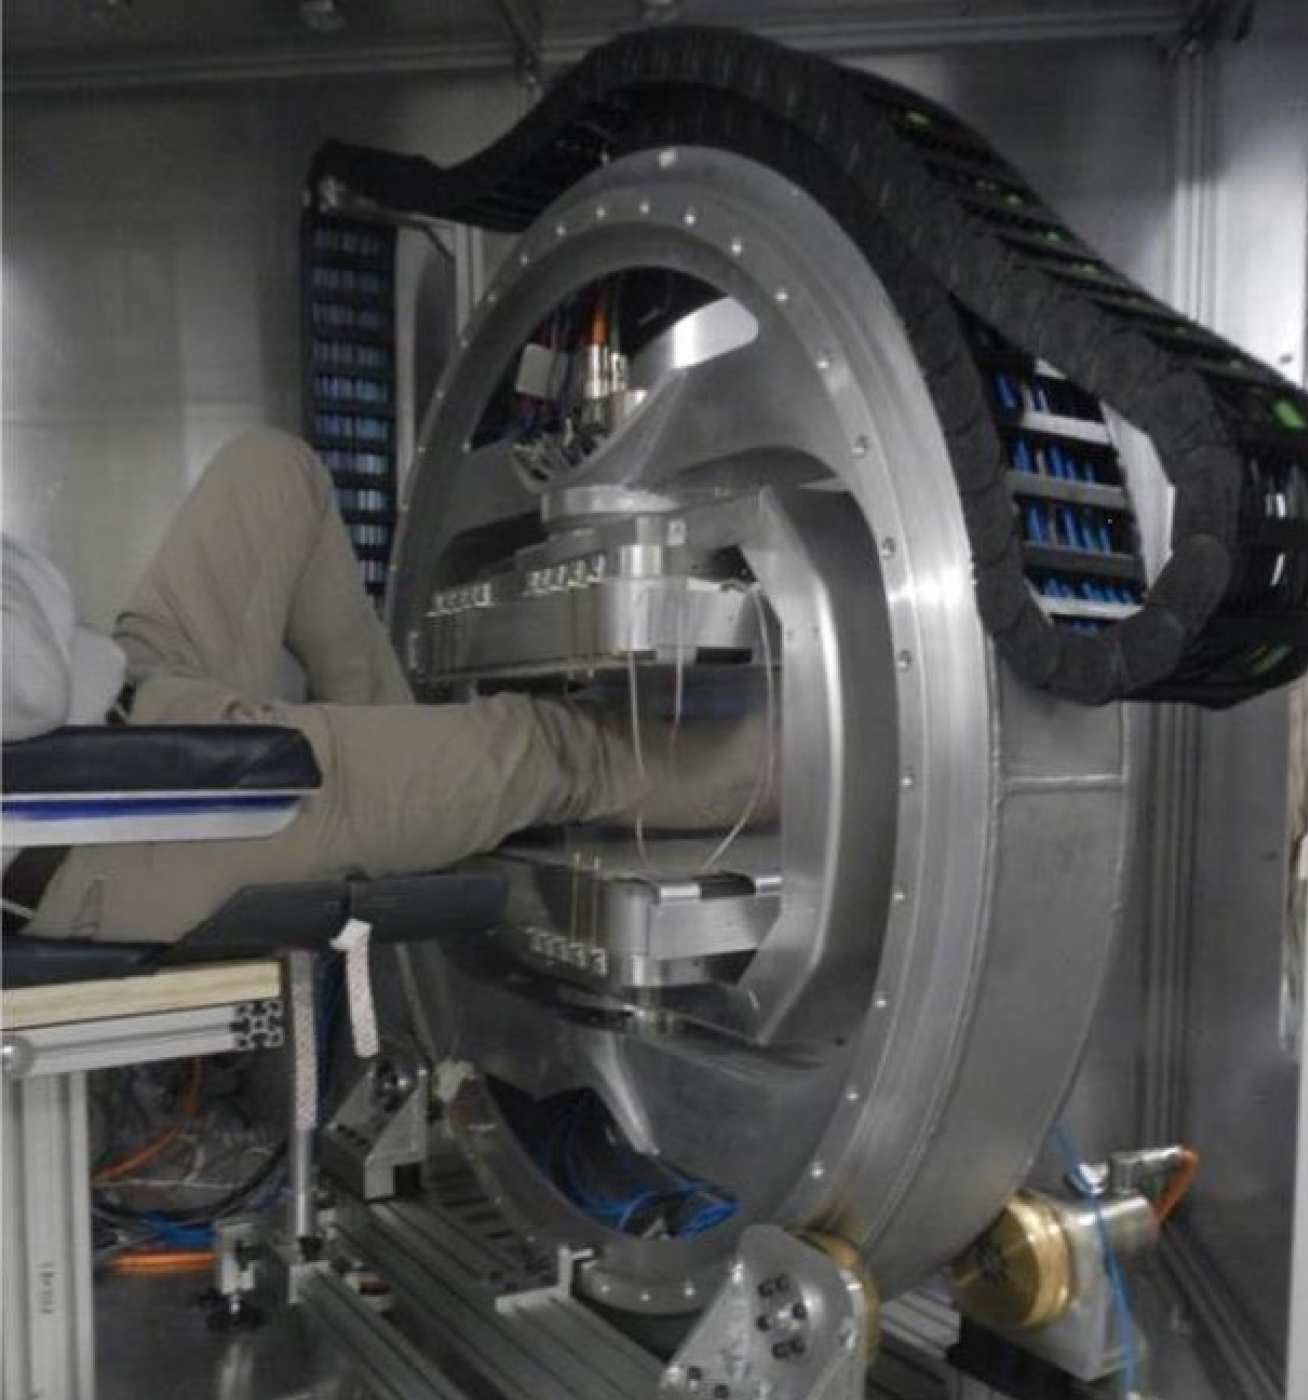 A prototype ‘mini’ MRI scanner, developed by Imperial College London, that could be used for diagnosing knee injuries